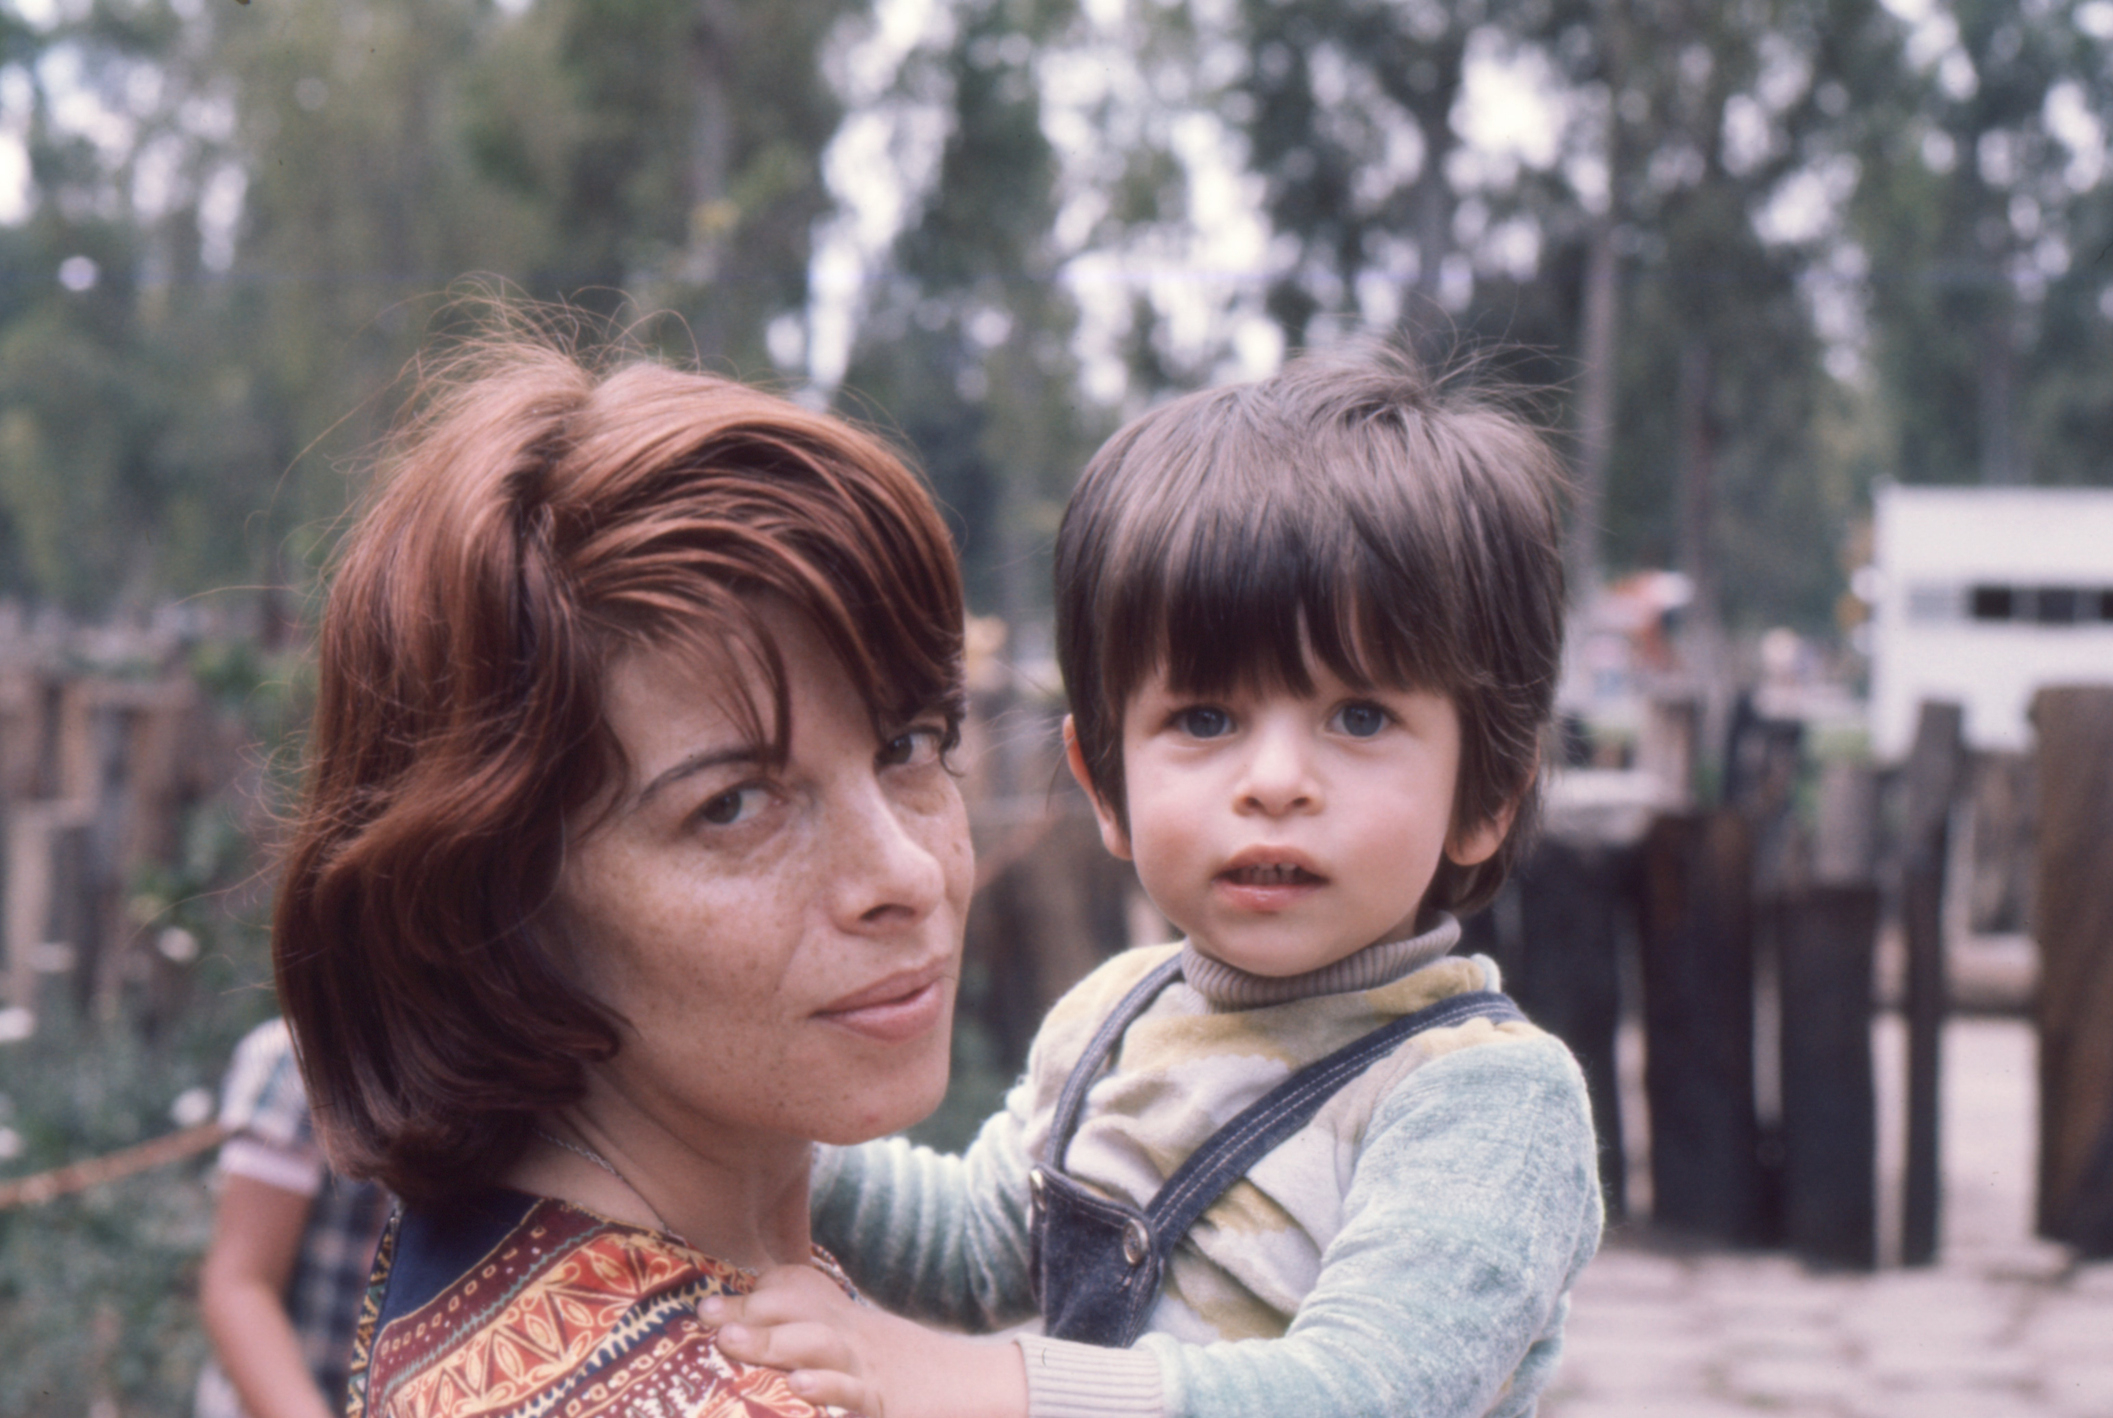 Woman holding young child, both looking at the camera with a natural backdrop